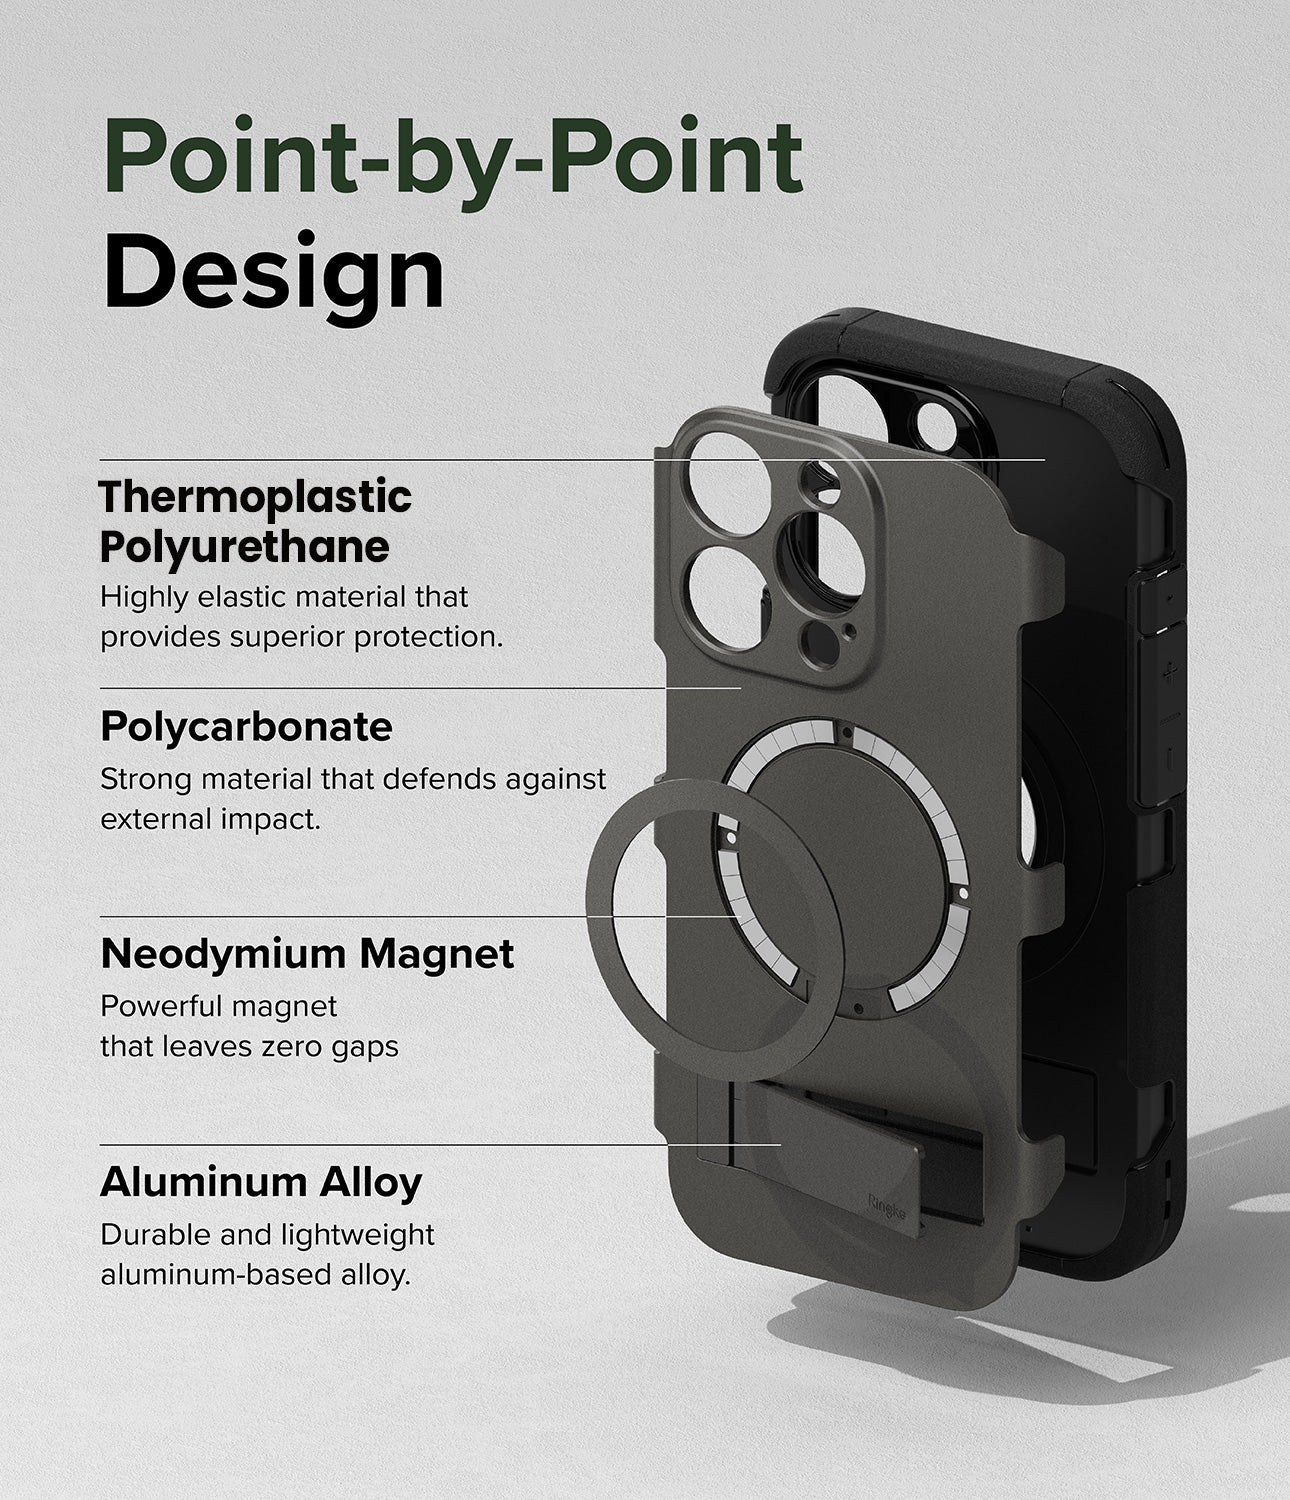 iPhone 15 Pro Max Case | Alles - Gun Metal - Point-by-Point Design. Highly elastic material that provides superior protection with Thermoplastic Polyurethane. Strong material that defends against external impact with Polycarbonate. Powerful magnet that leaves zero gaps with neodymium magnet. Durable and lightweight aluminum-based alloy with Aluminum Alloy.